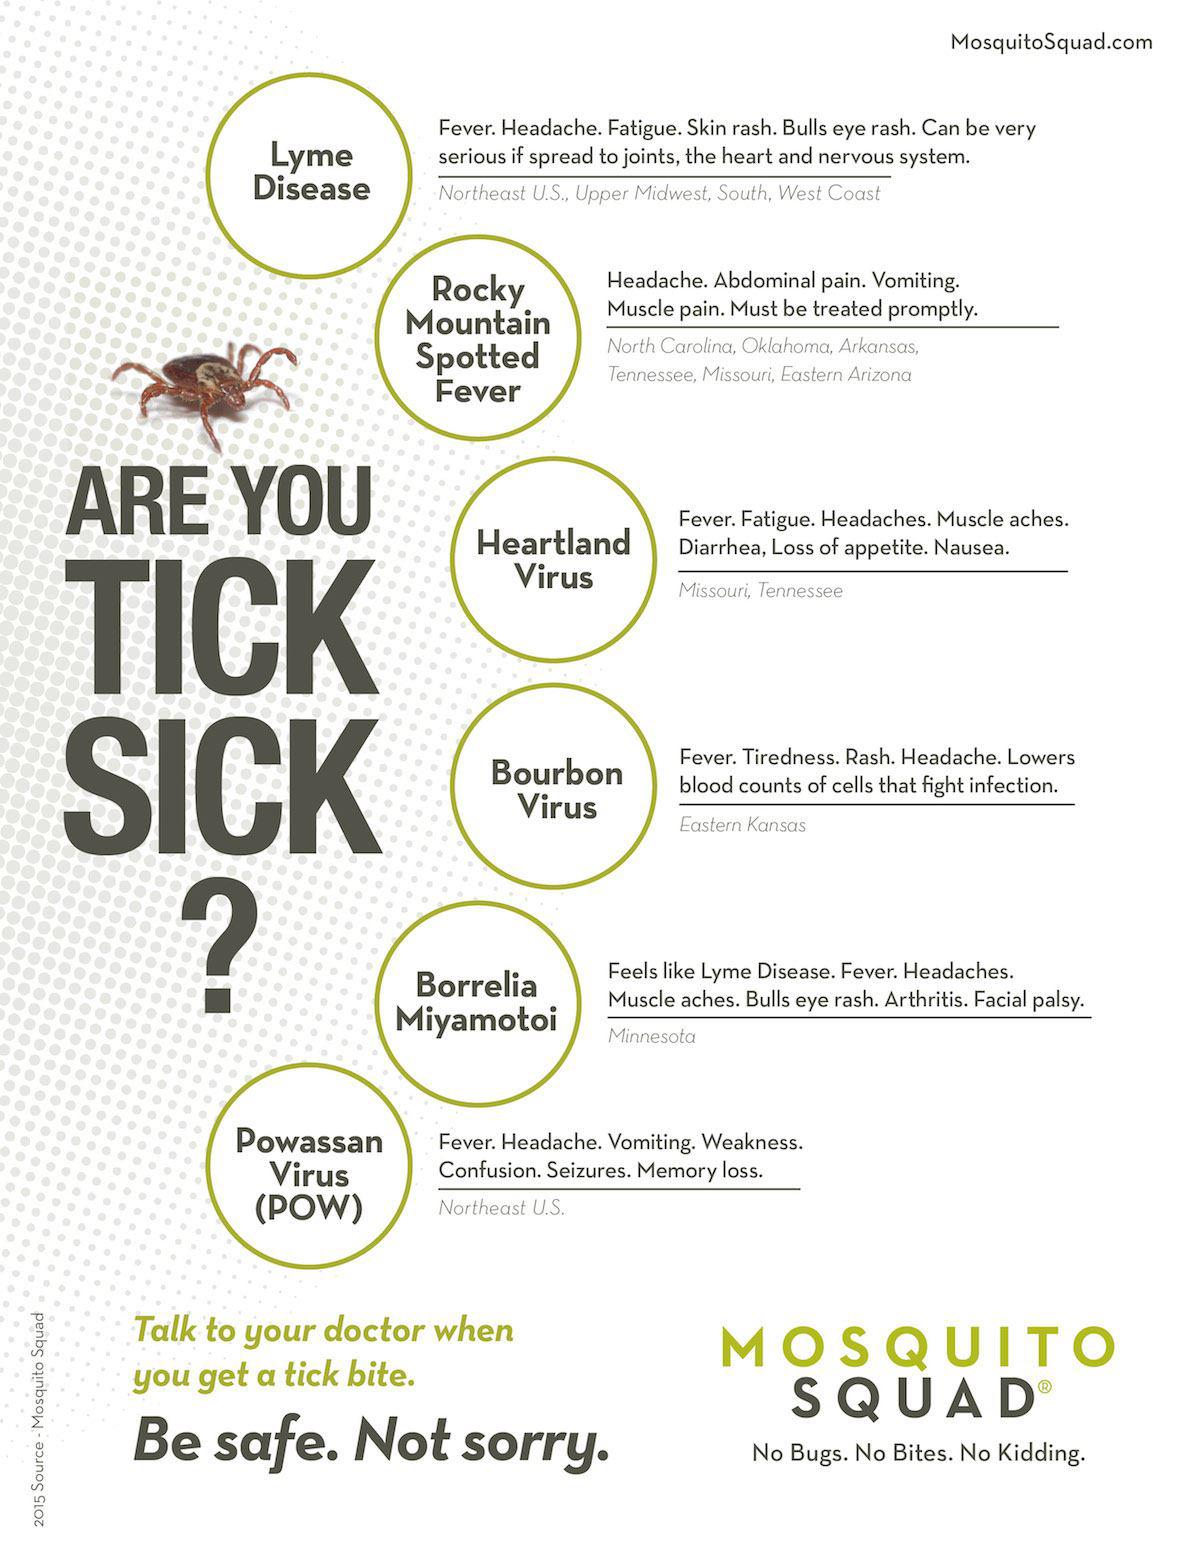 Are You Tick Sick?